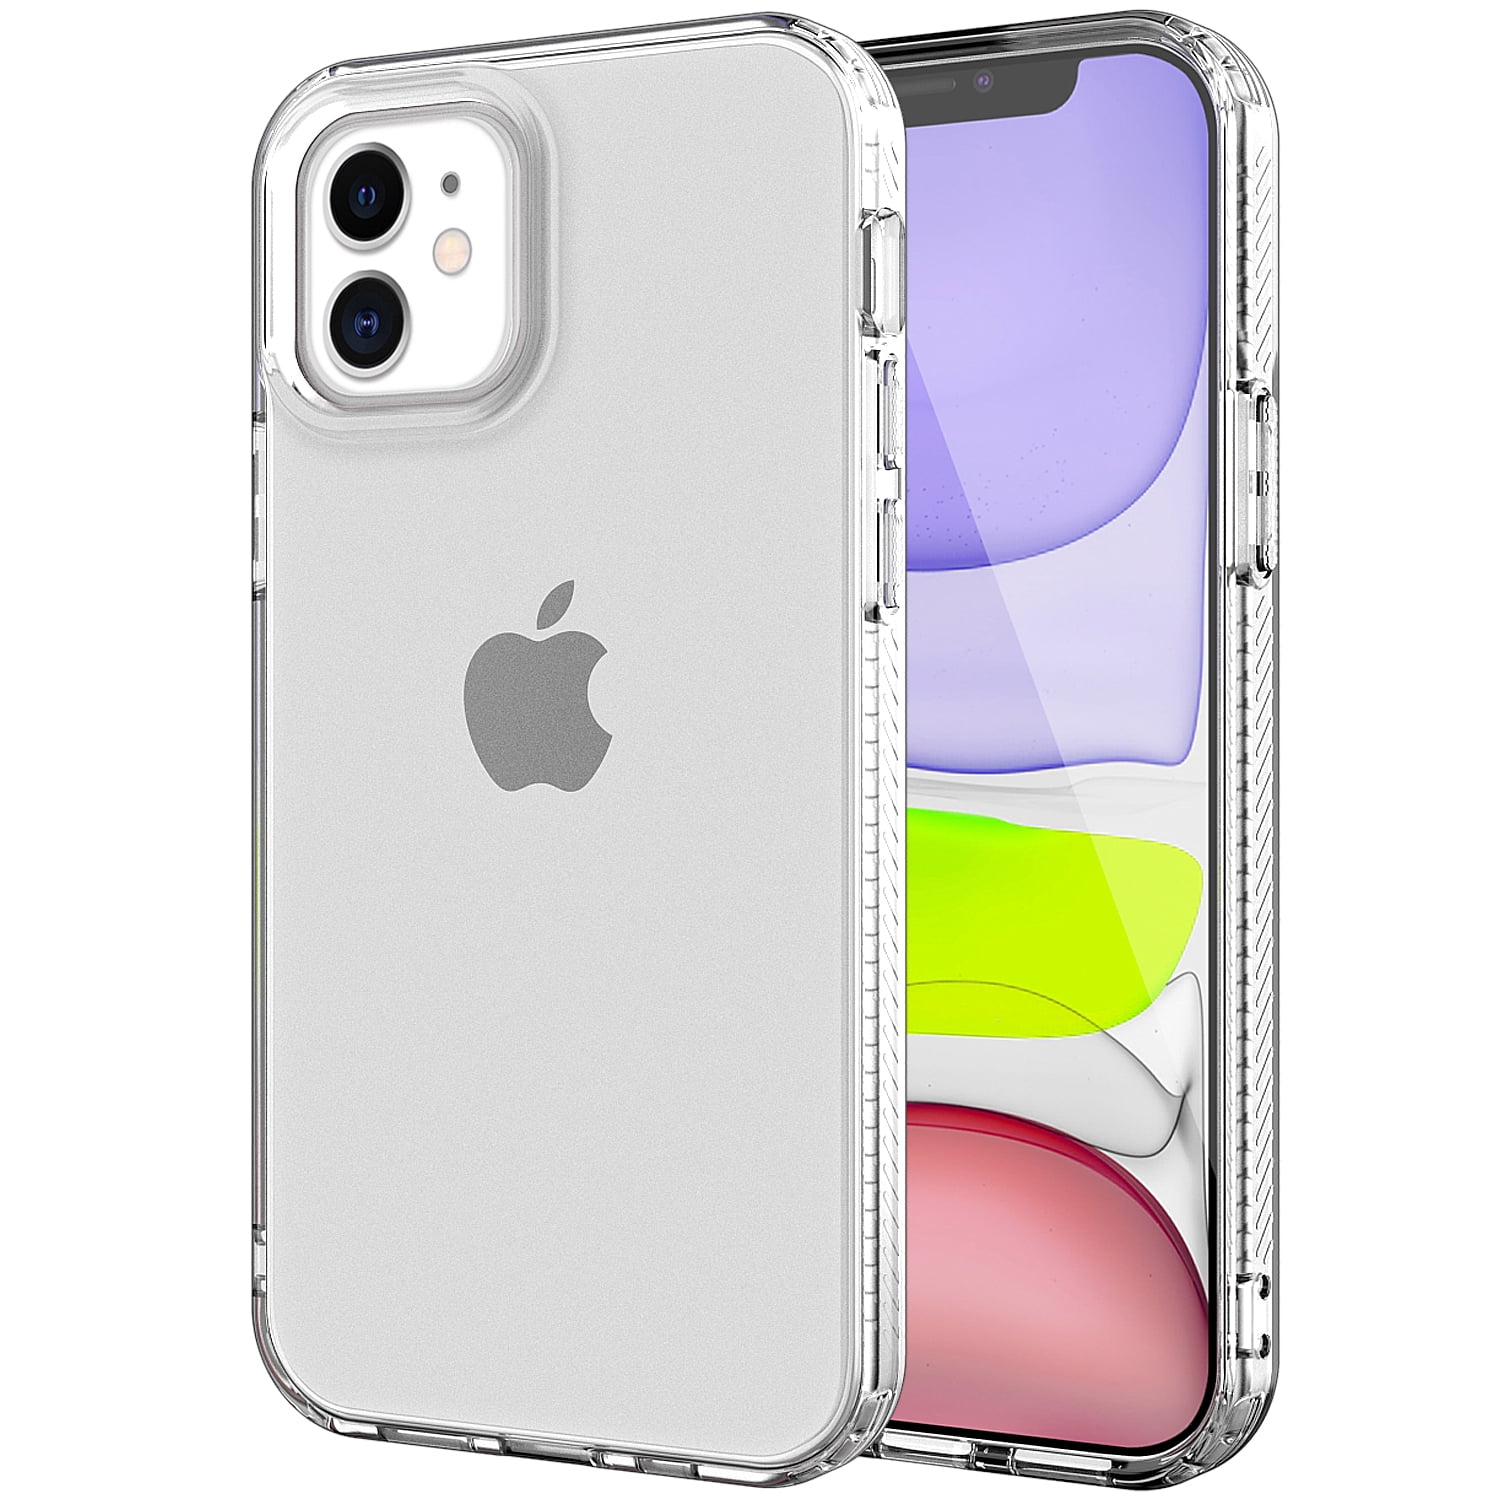 iPhone 11 Case 6.1-inch Phone, Allytech Clear TPU Back Cover Shockproof  Anti-scratch Drop Protection Case Cover for Apple iPhone 11 6.1-inch, Clear